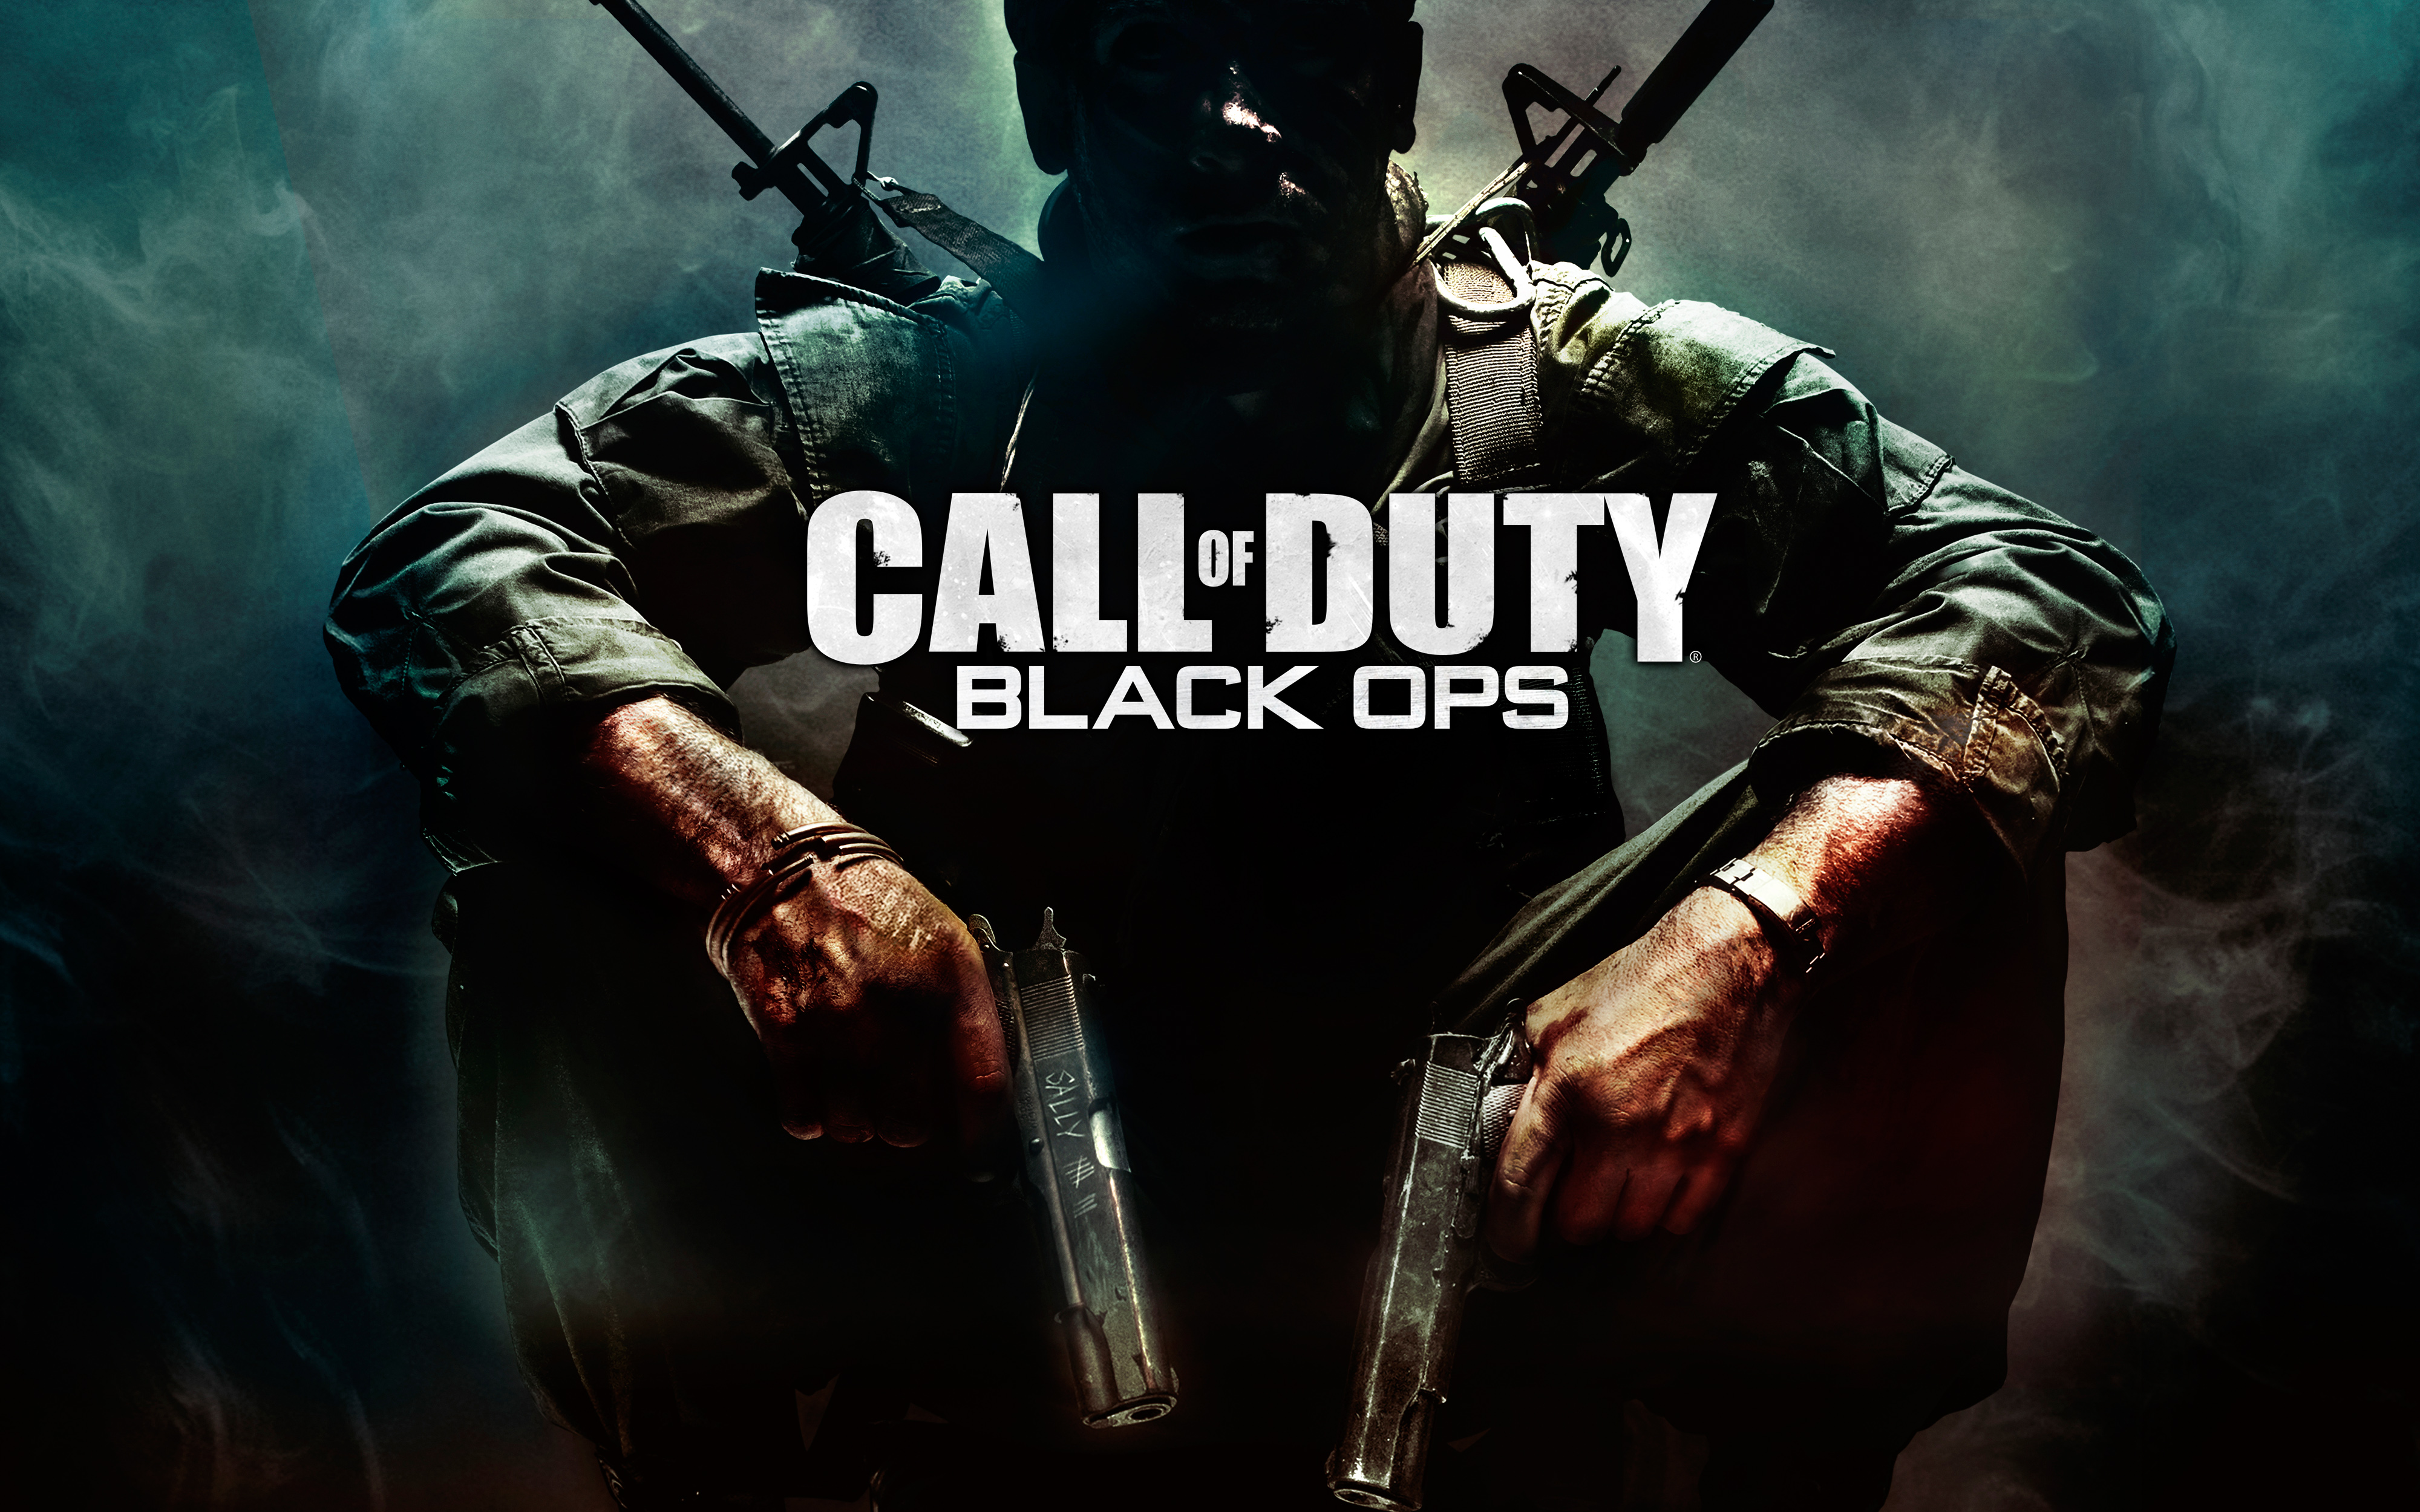 download call of duty black ops 2